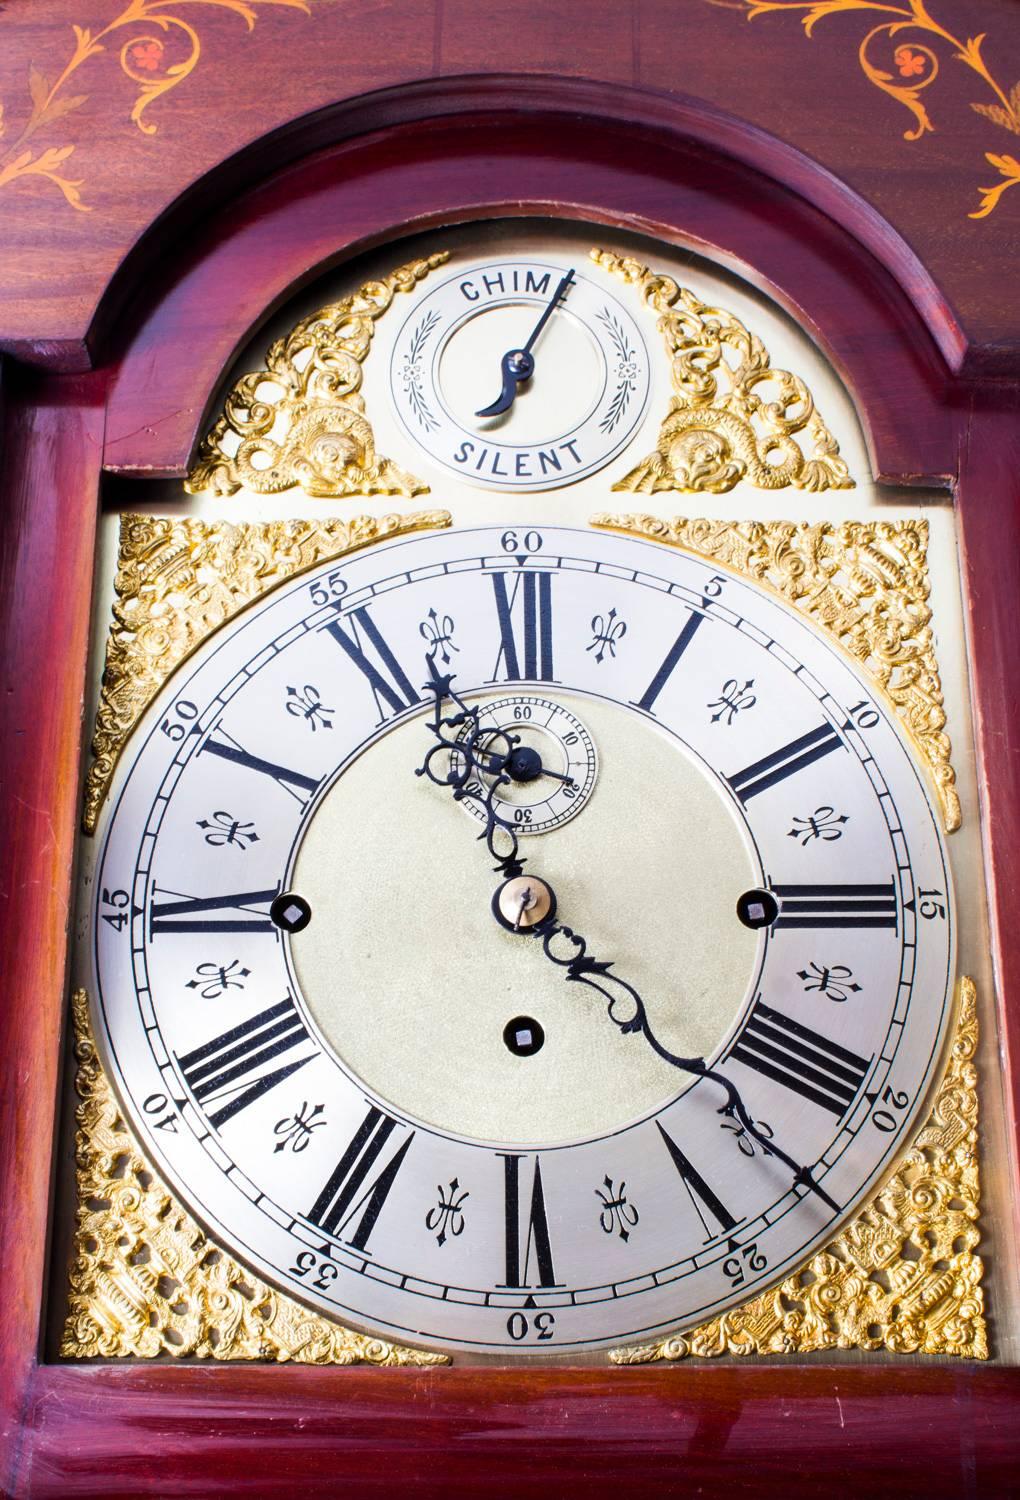 This is a stunning English antique Victorian, mahogany and inlaid 8 day, 5 tube longcase clock, circa 1880 in date.

It has a beautiful brass decorative breakarched dial with silvered chapter ring and gilded spandrels. With a secondary dial